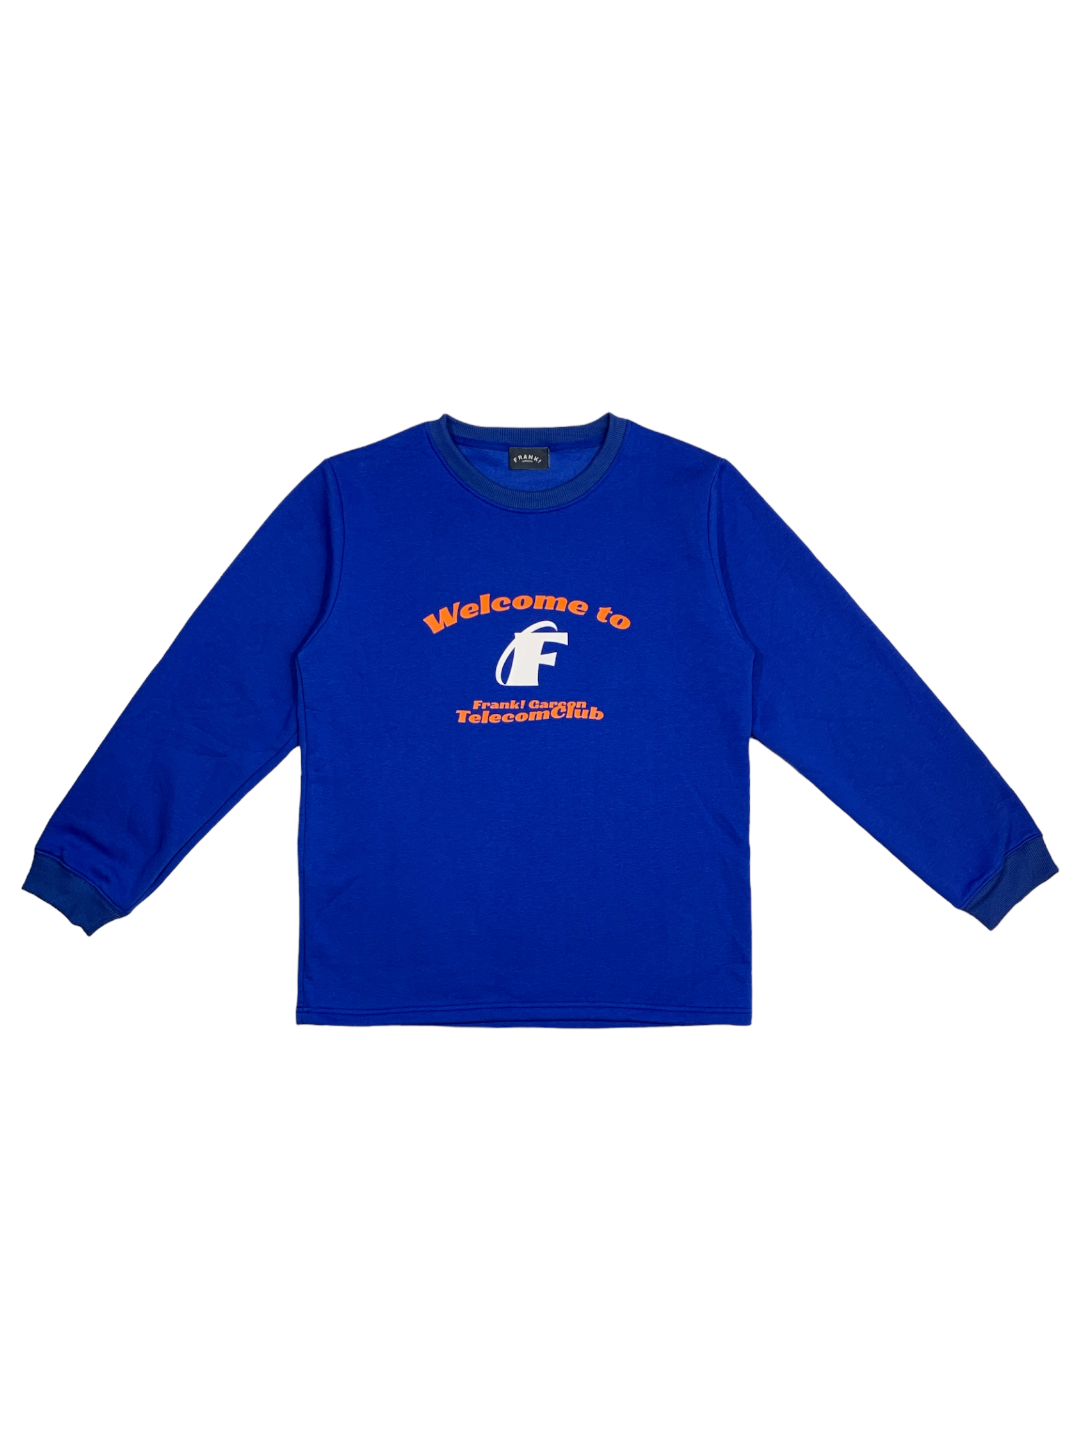 WELCOME TO TELECOMCLUB SWEATER (BLUE)